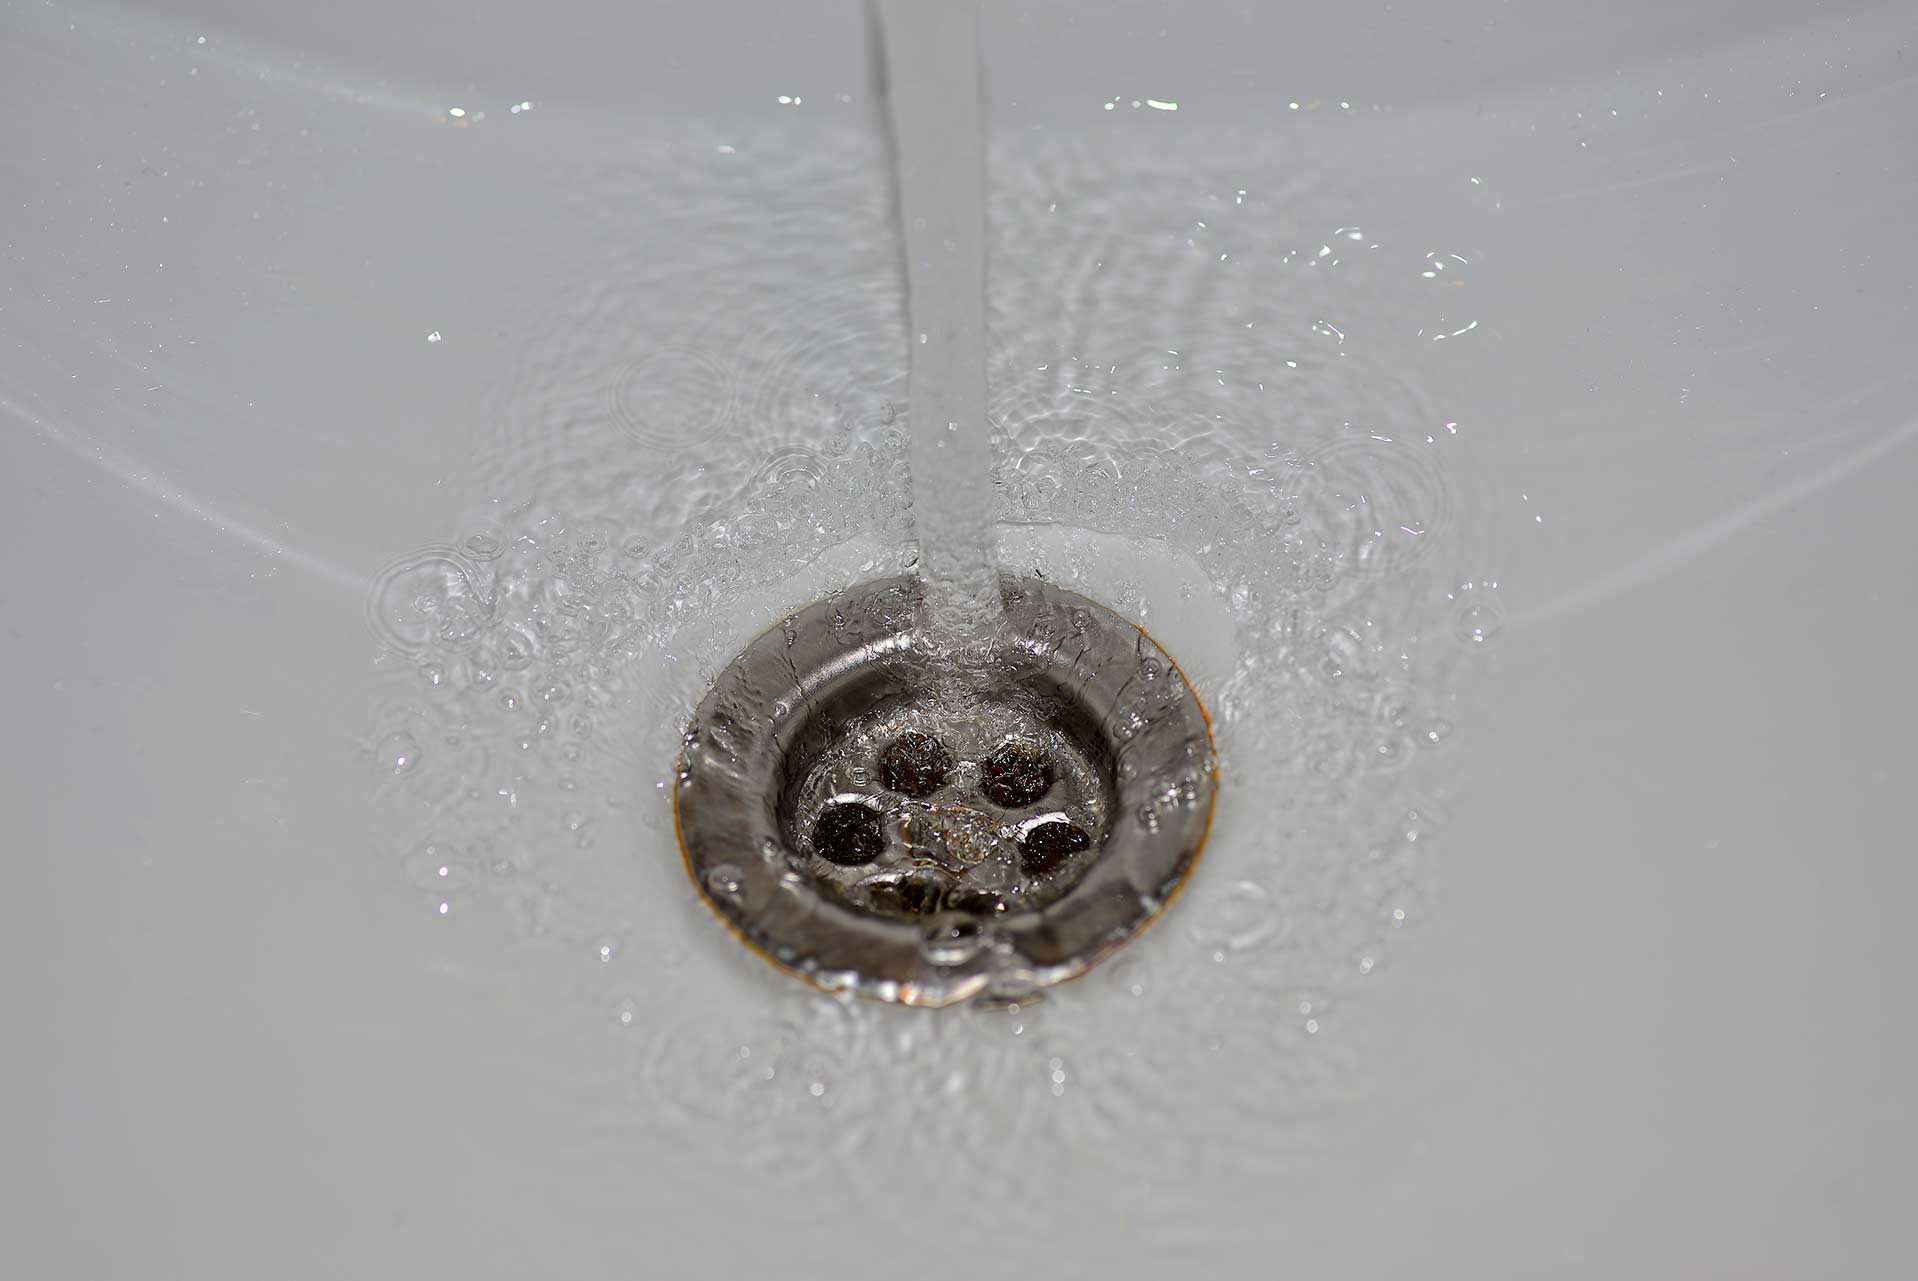 A2B Drains provides services to unblock blocked sinks and drains for properties in Weybridge.